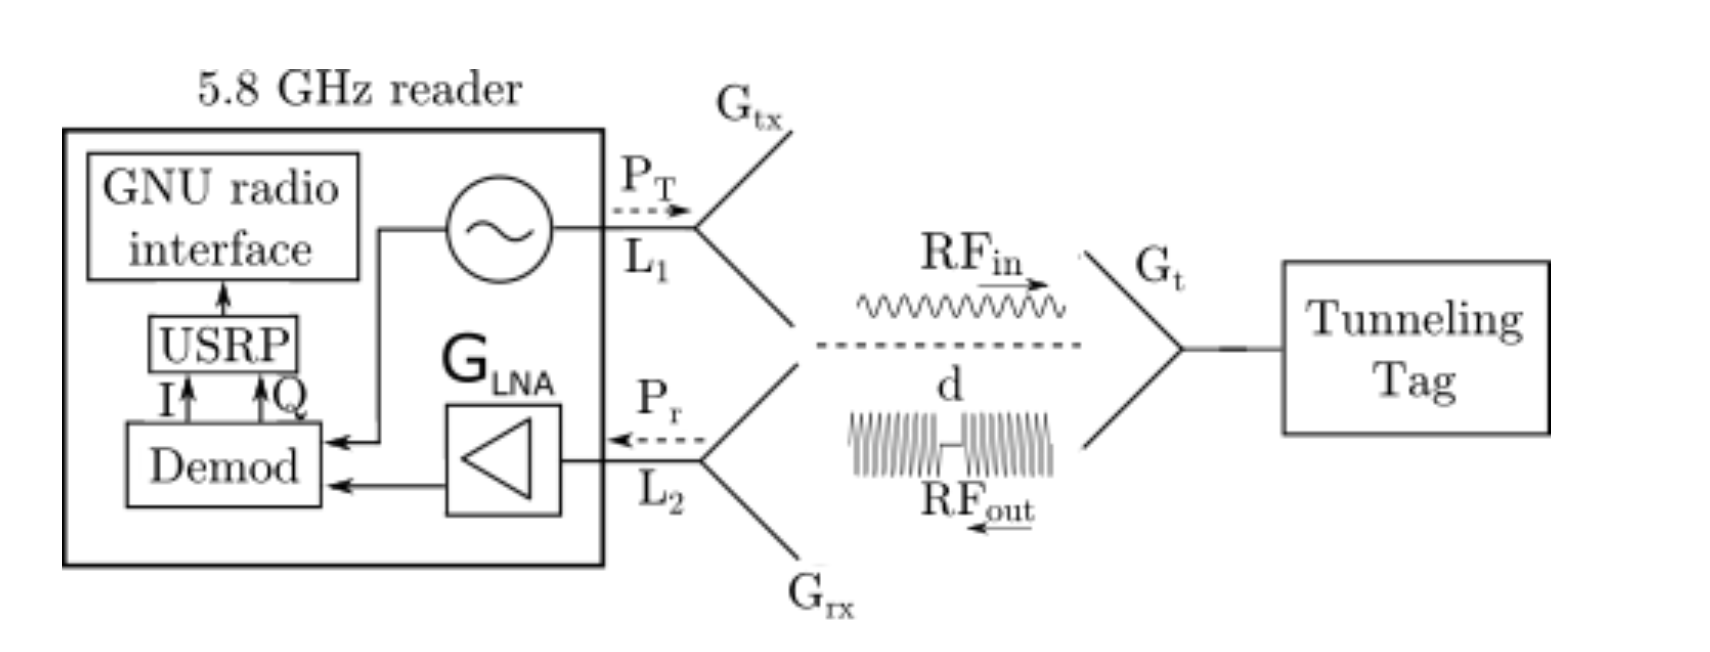 Line drawing describing a 5.8GHz RFID reader sending and receiving signals with a quantum tunneling tag in an exemplary arrangement.